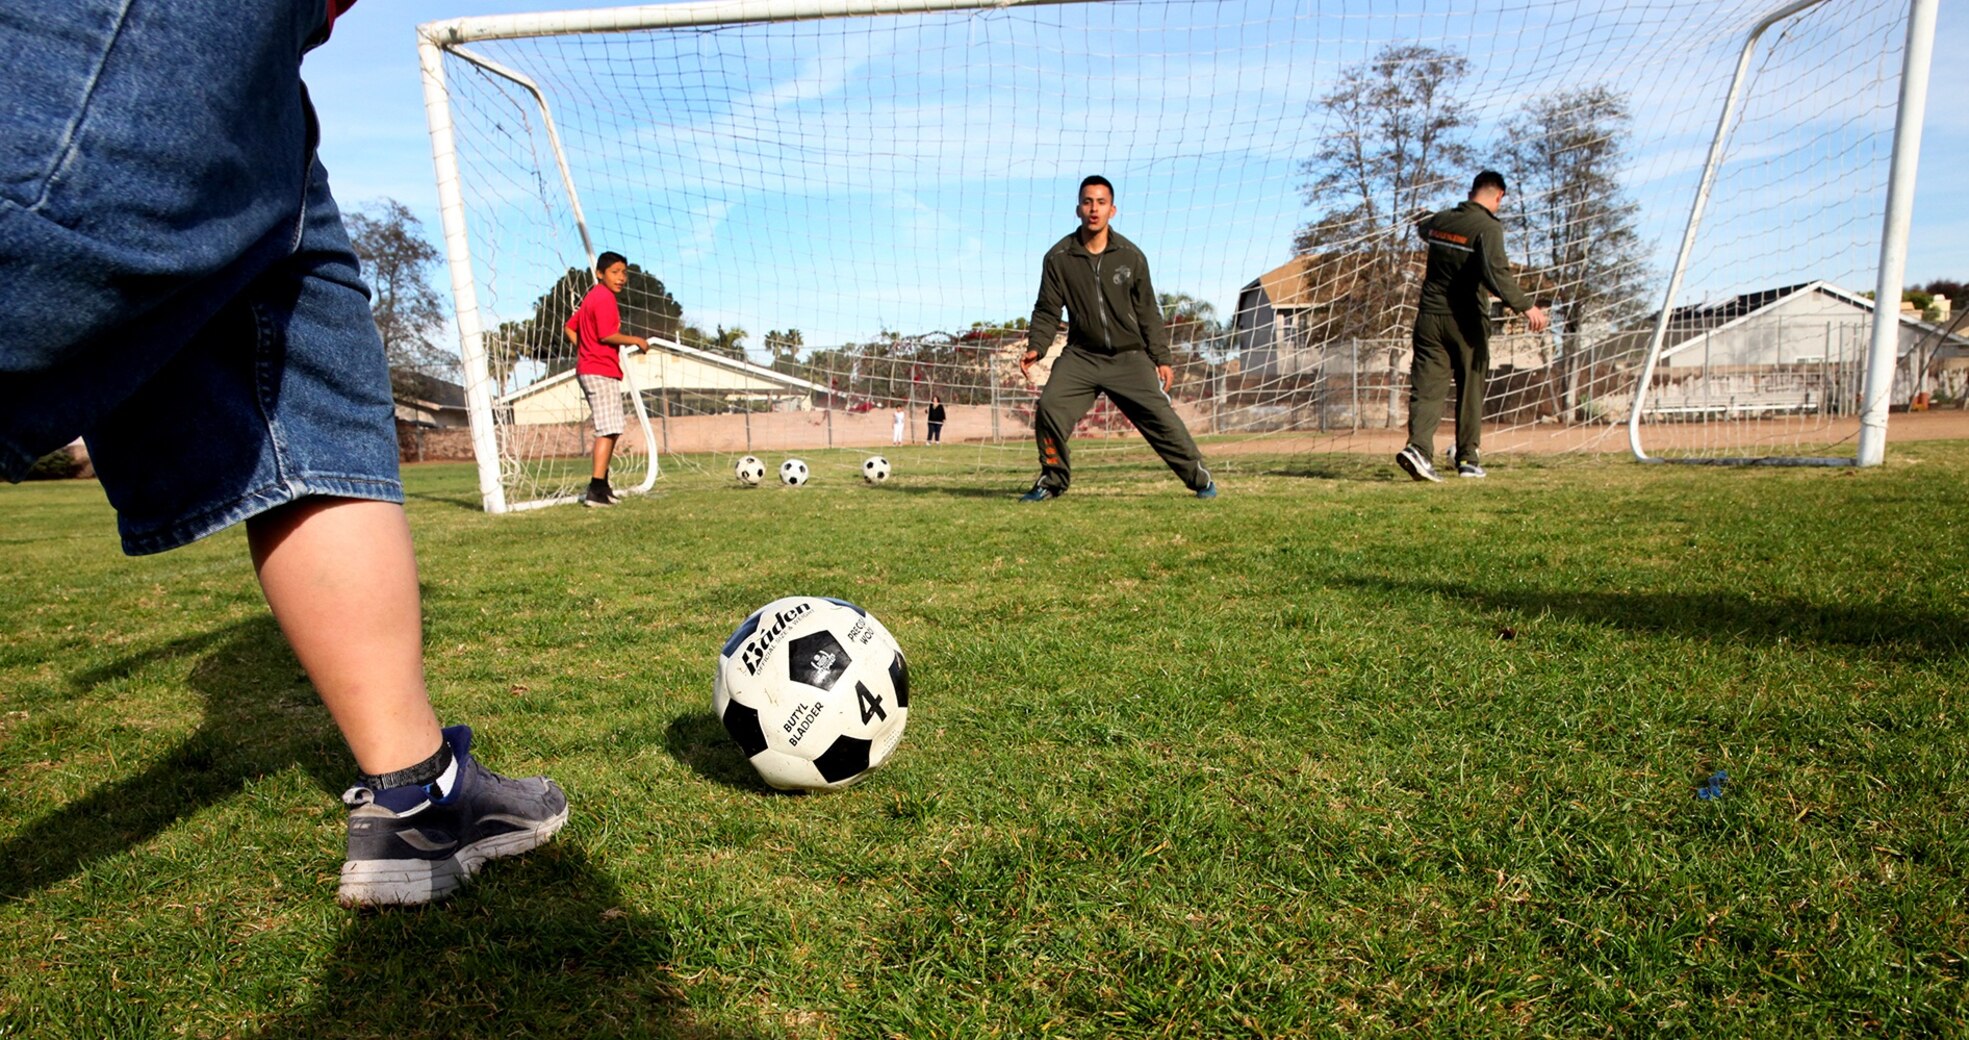 Marines with Combat Logistics Regiment 1, 1st Marine Logistics Group, play goalie during a morning workout at Jefferson Elementary School, Feb. 13, 2014. Marines with CLR-1 and 1st Medical Battalion, volunteered their time to support more than 500 students in their new fitness program known as “Motion.” During their visit Marines led various events, such as push-ups, squats, soccer and basketball.